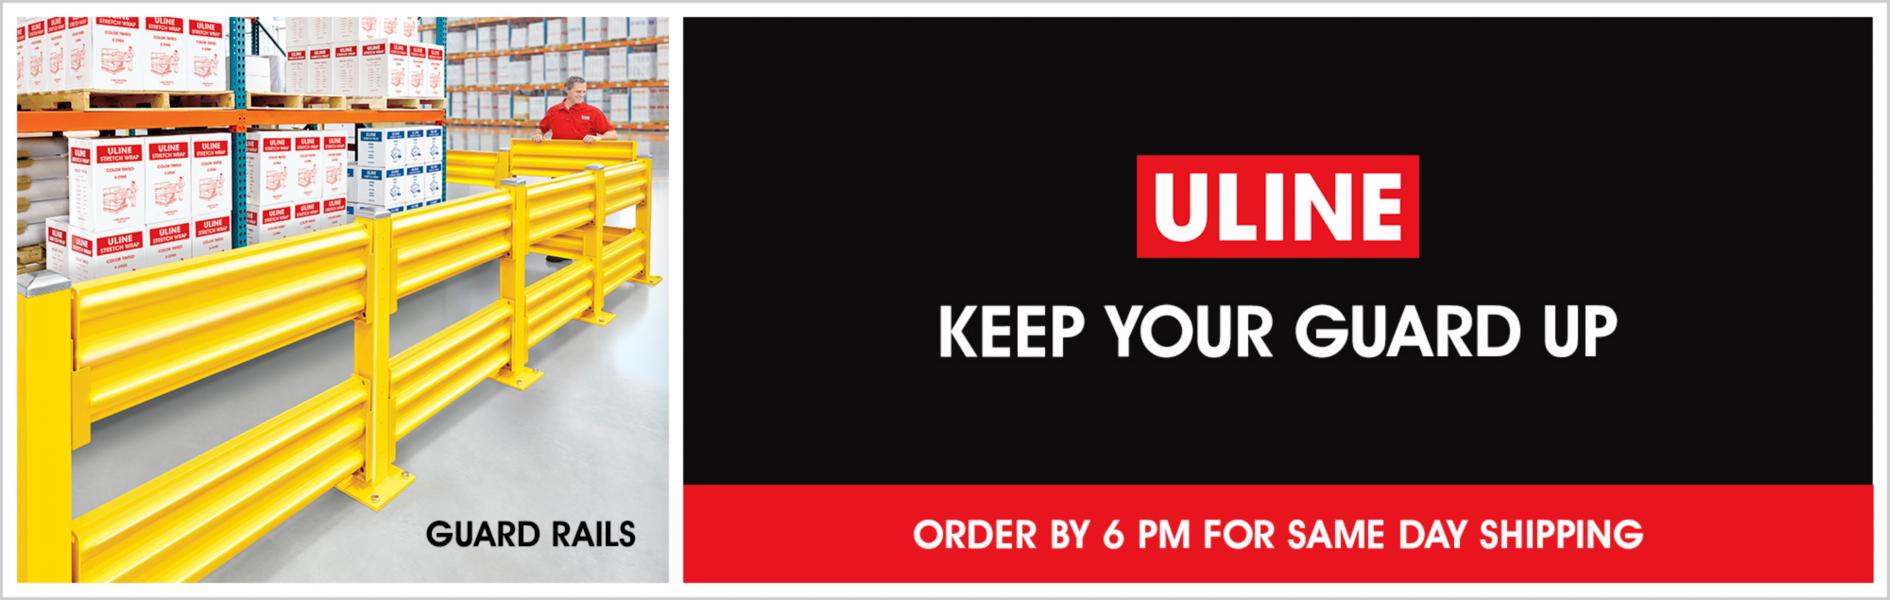 Uline: Warehouse Safety, Order by 6 PM For Same Day Shipping